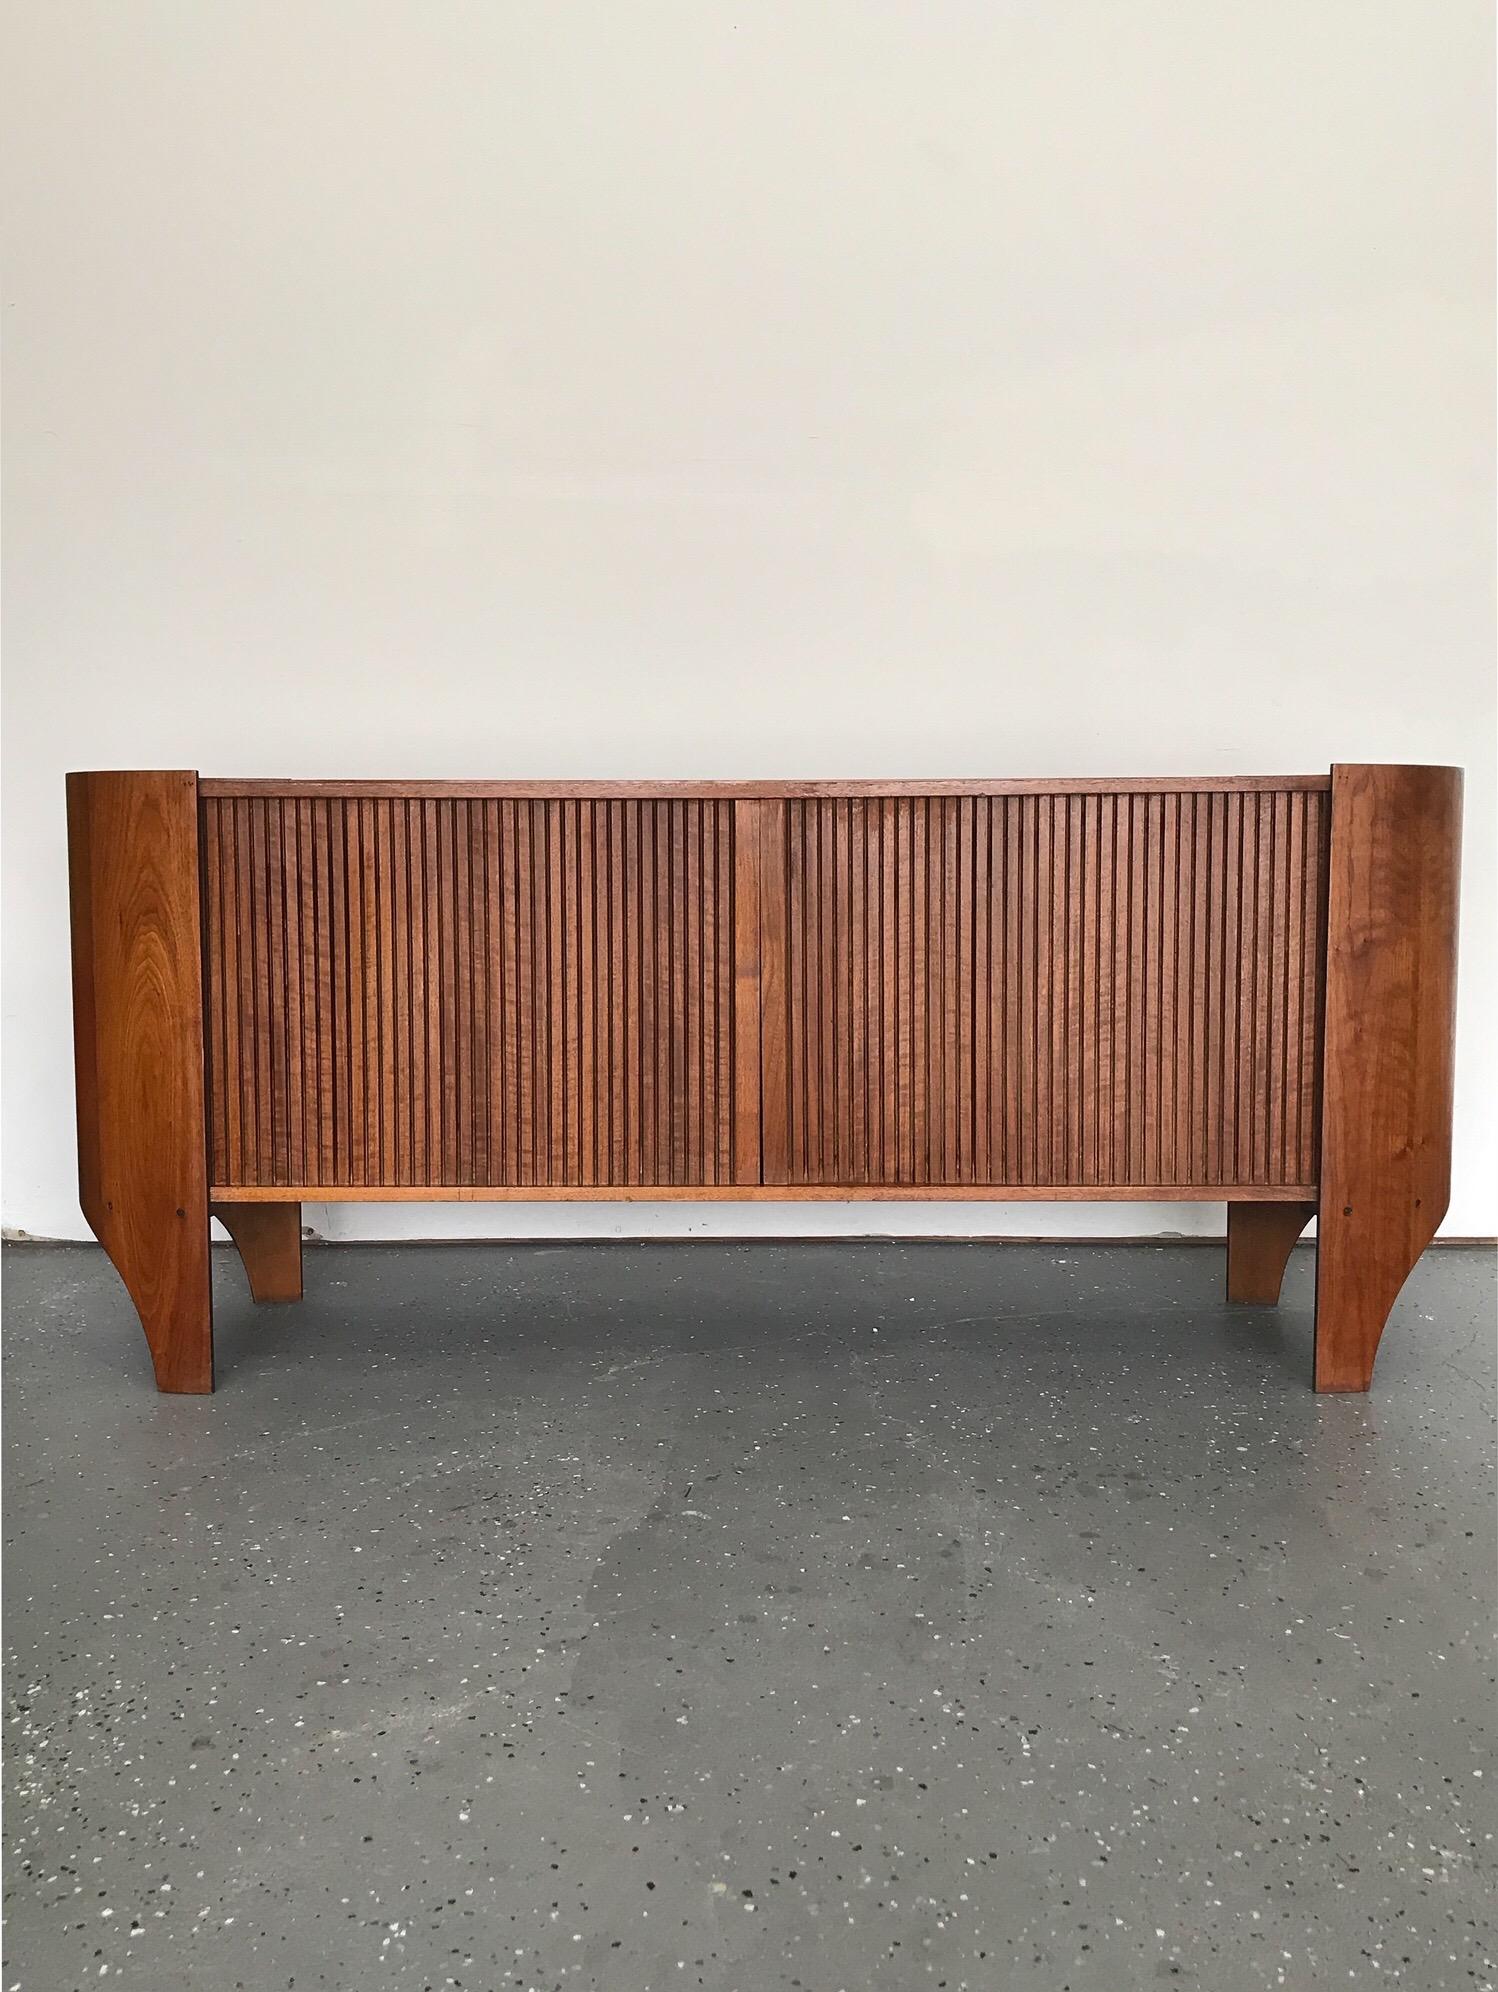 An exceptional and uncommon sculptural credenza or sideboard by Henry P. Glass. Walnut cylindrical case surrounds tambour doors. Doors open to reveal divided sections; open space on the left and right, and in the center a shelf at the top. 

Henry